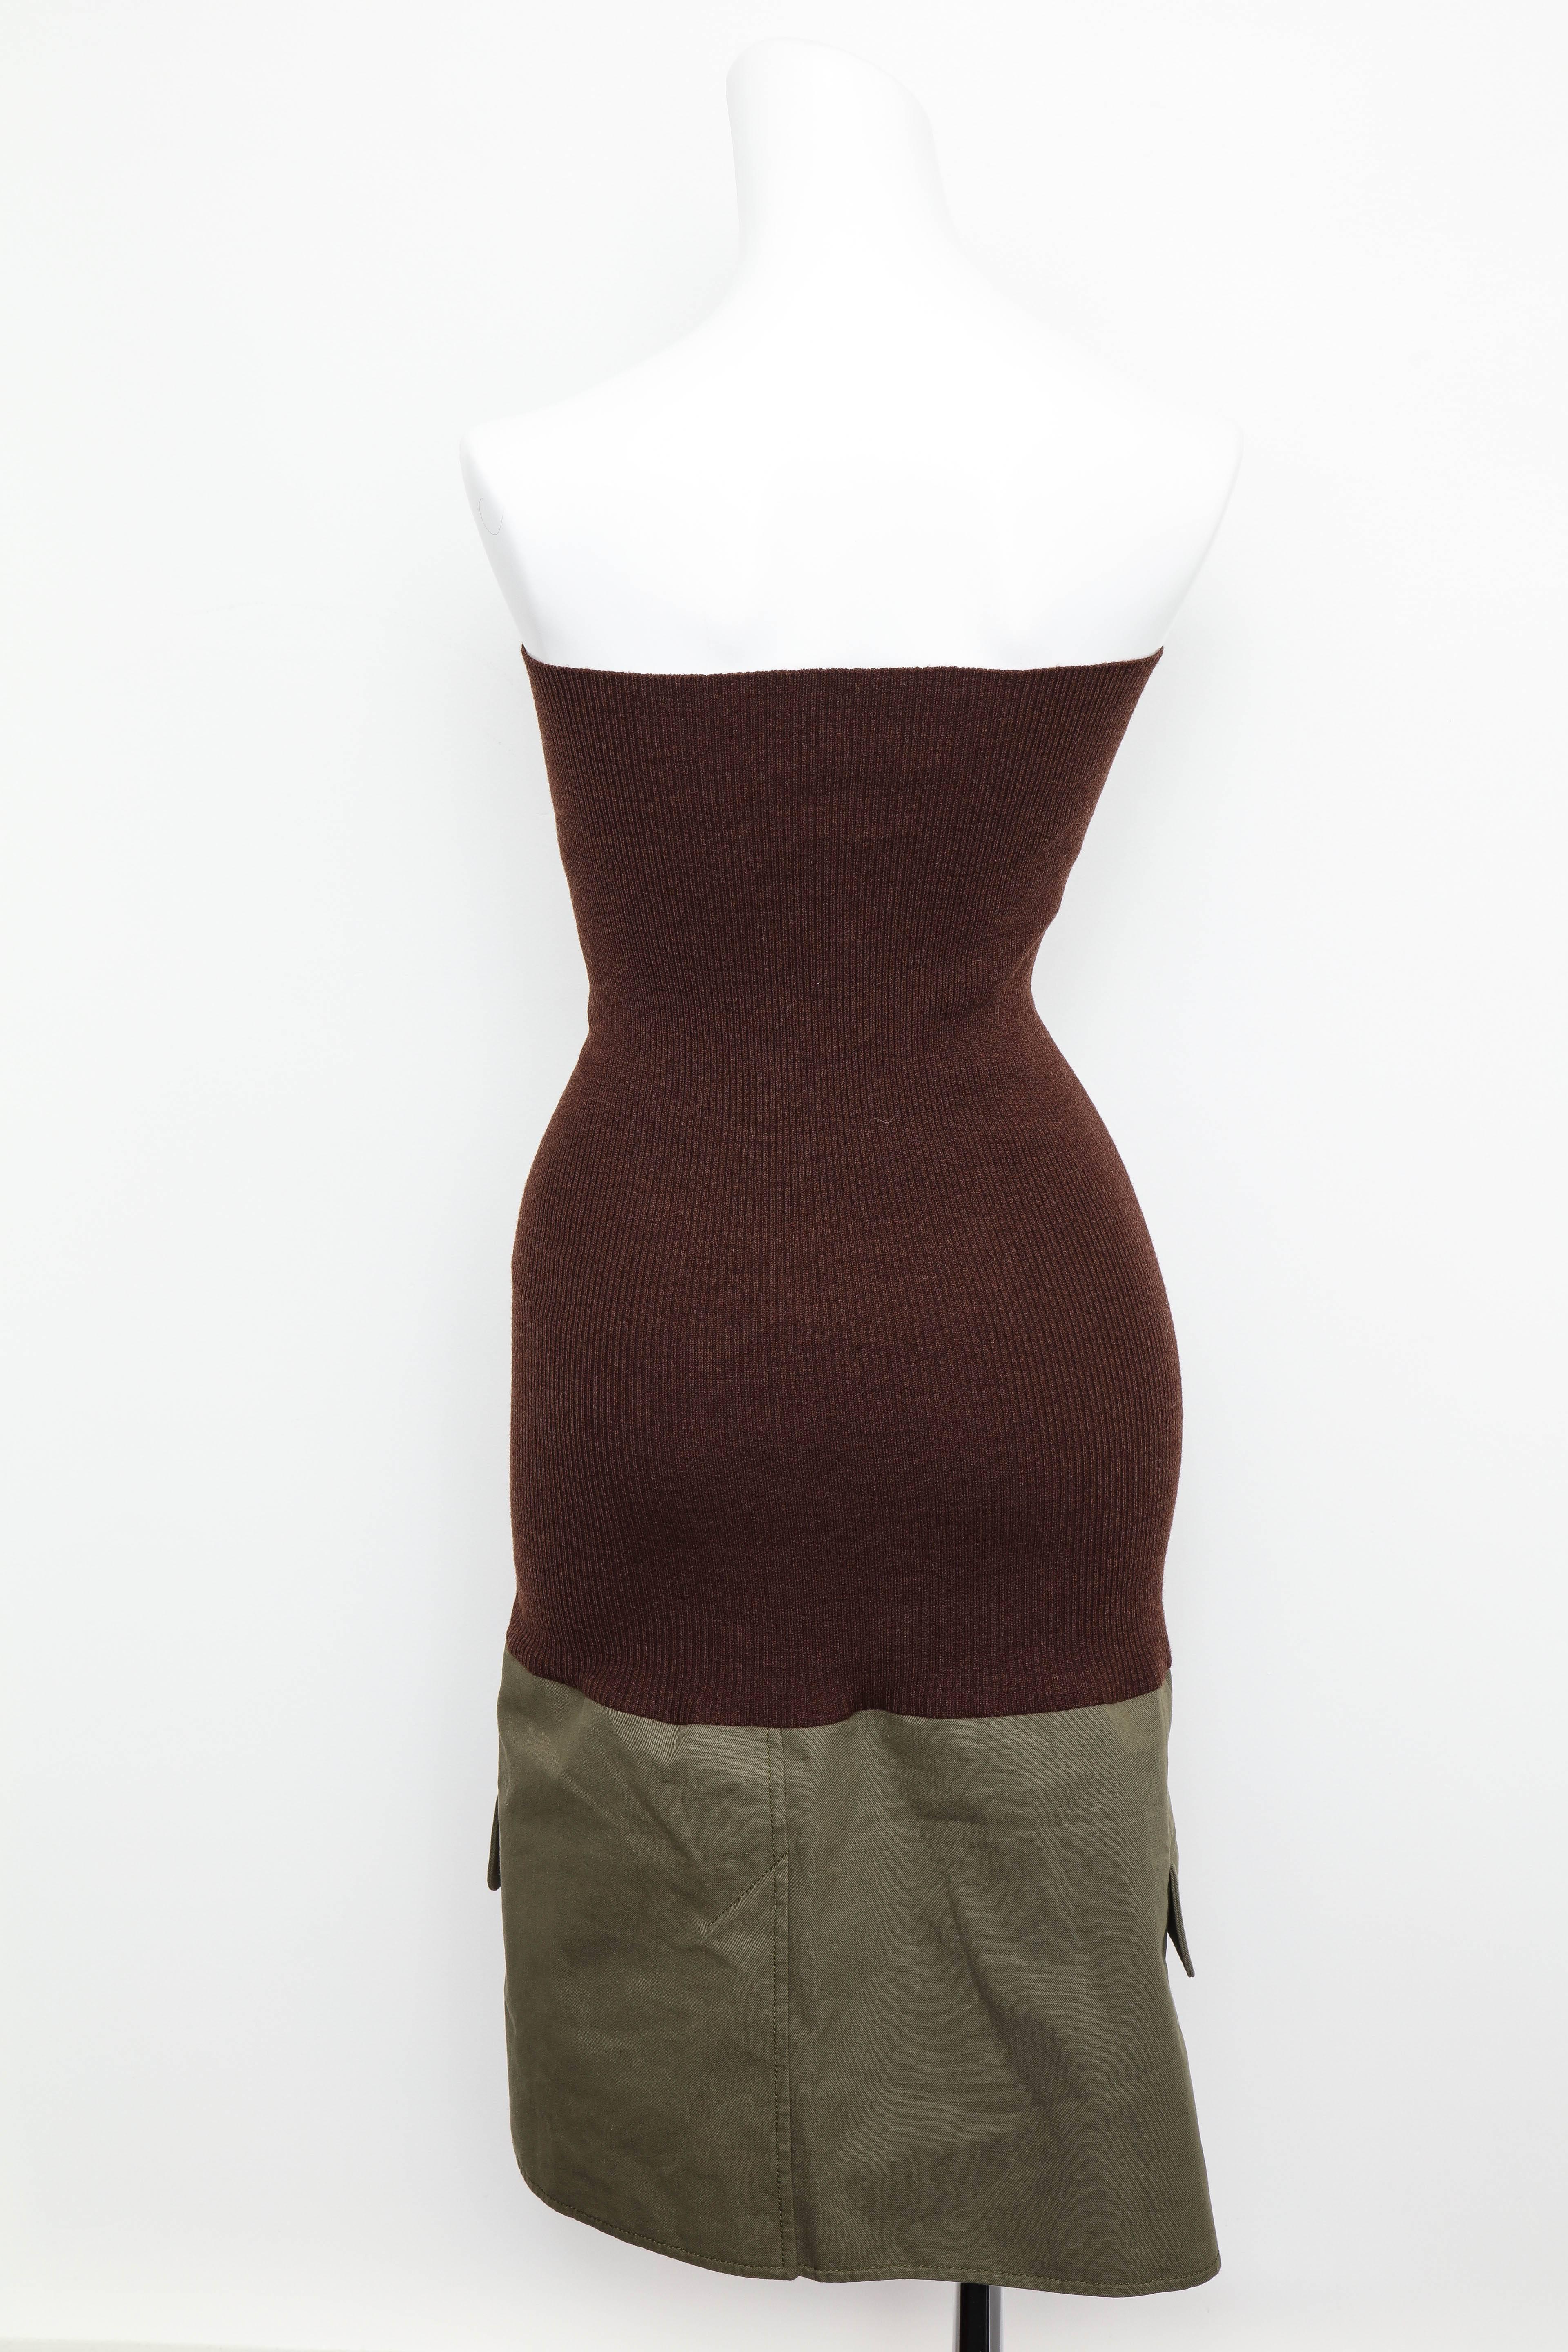 Women's Christian Dior by John Galliano Knit Tube Dress For Sale